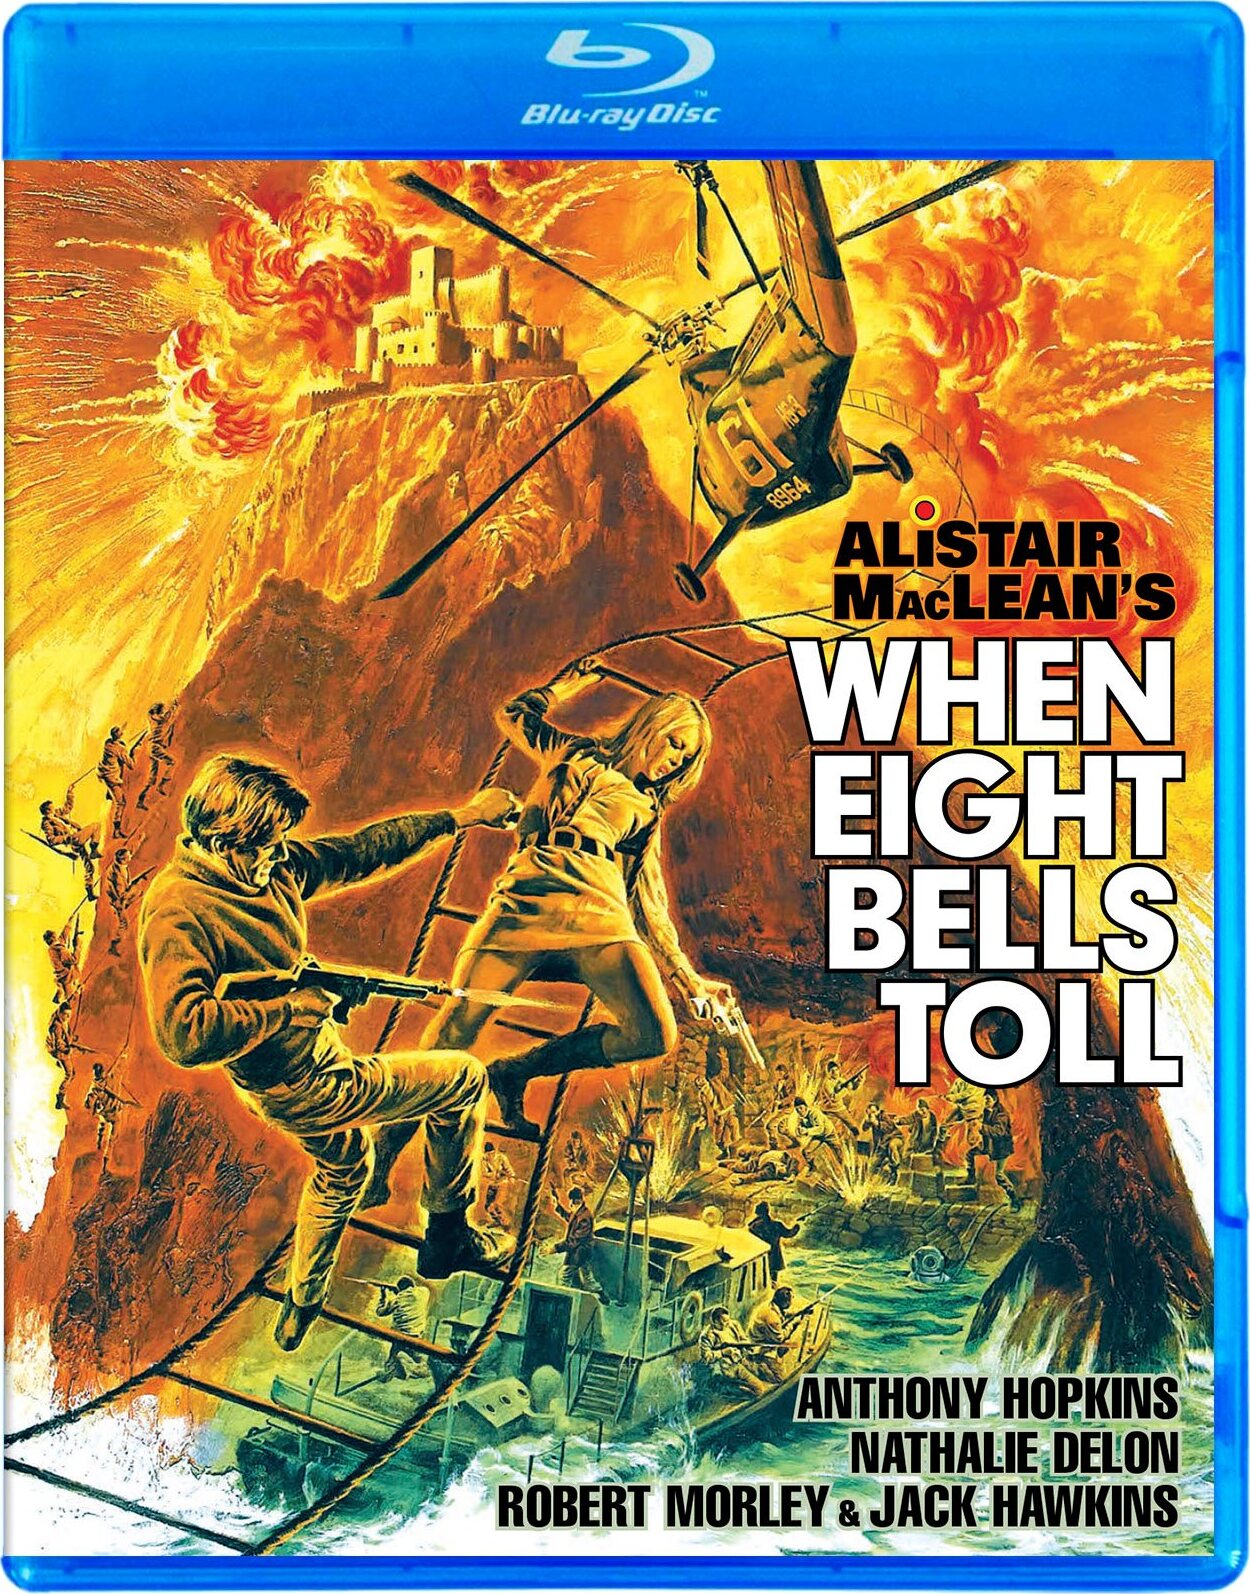 When Eight Bells Toll [Blu-ray] [US]